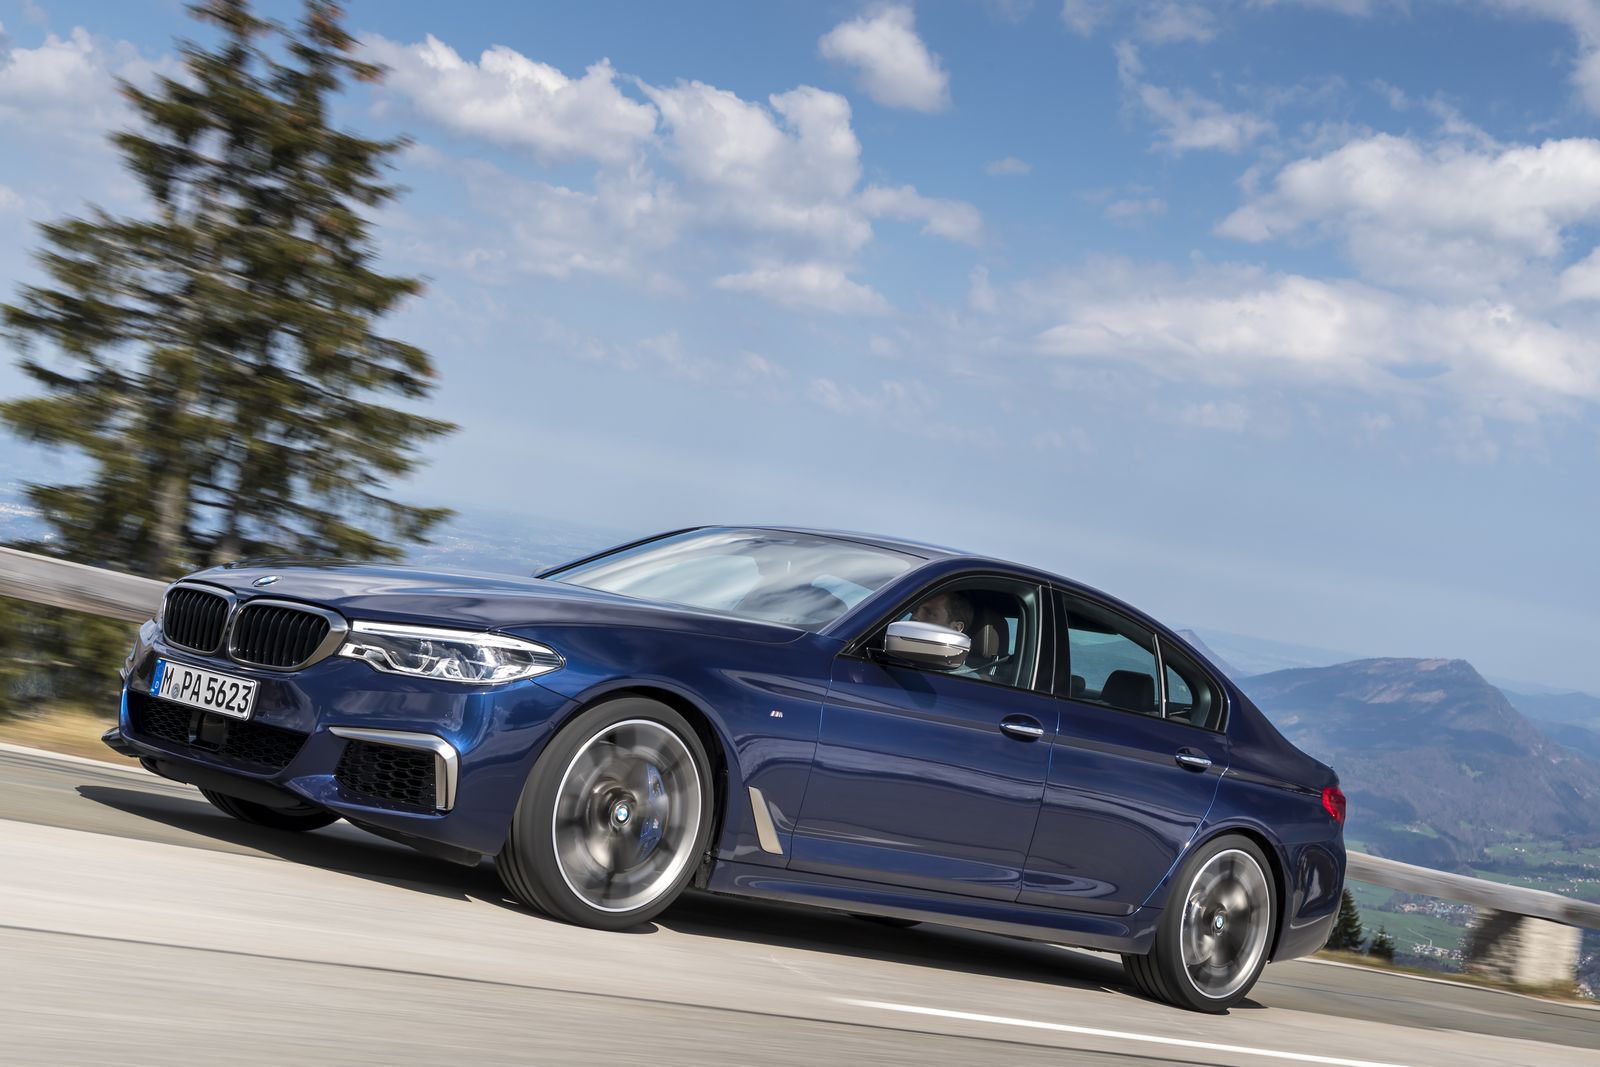 https://s1.cdn.autoevolution.com/images/news/gallery/bmw-squeezes-out-more-power-from-x3-m40i-x4-m40i-m550i-xdrive-in-the-us_22.jpg